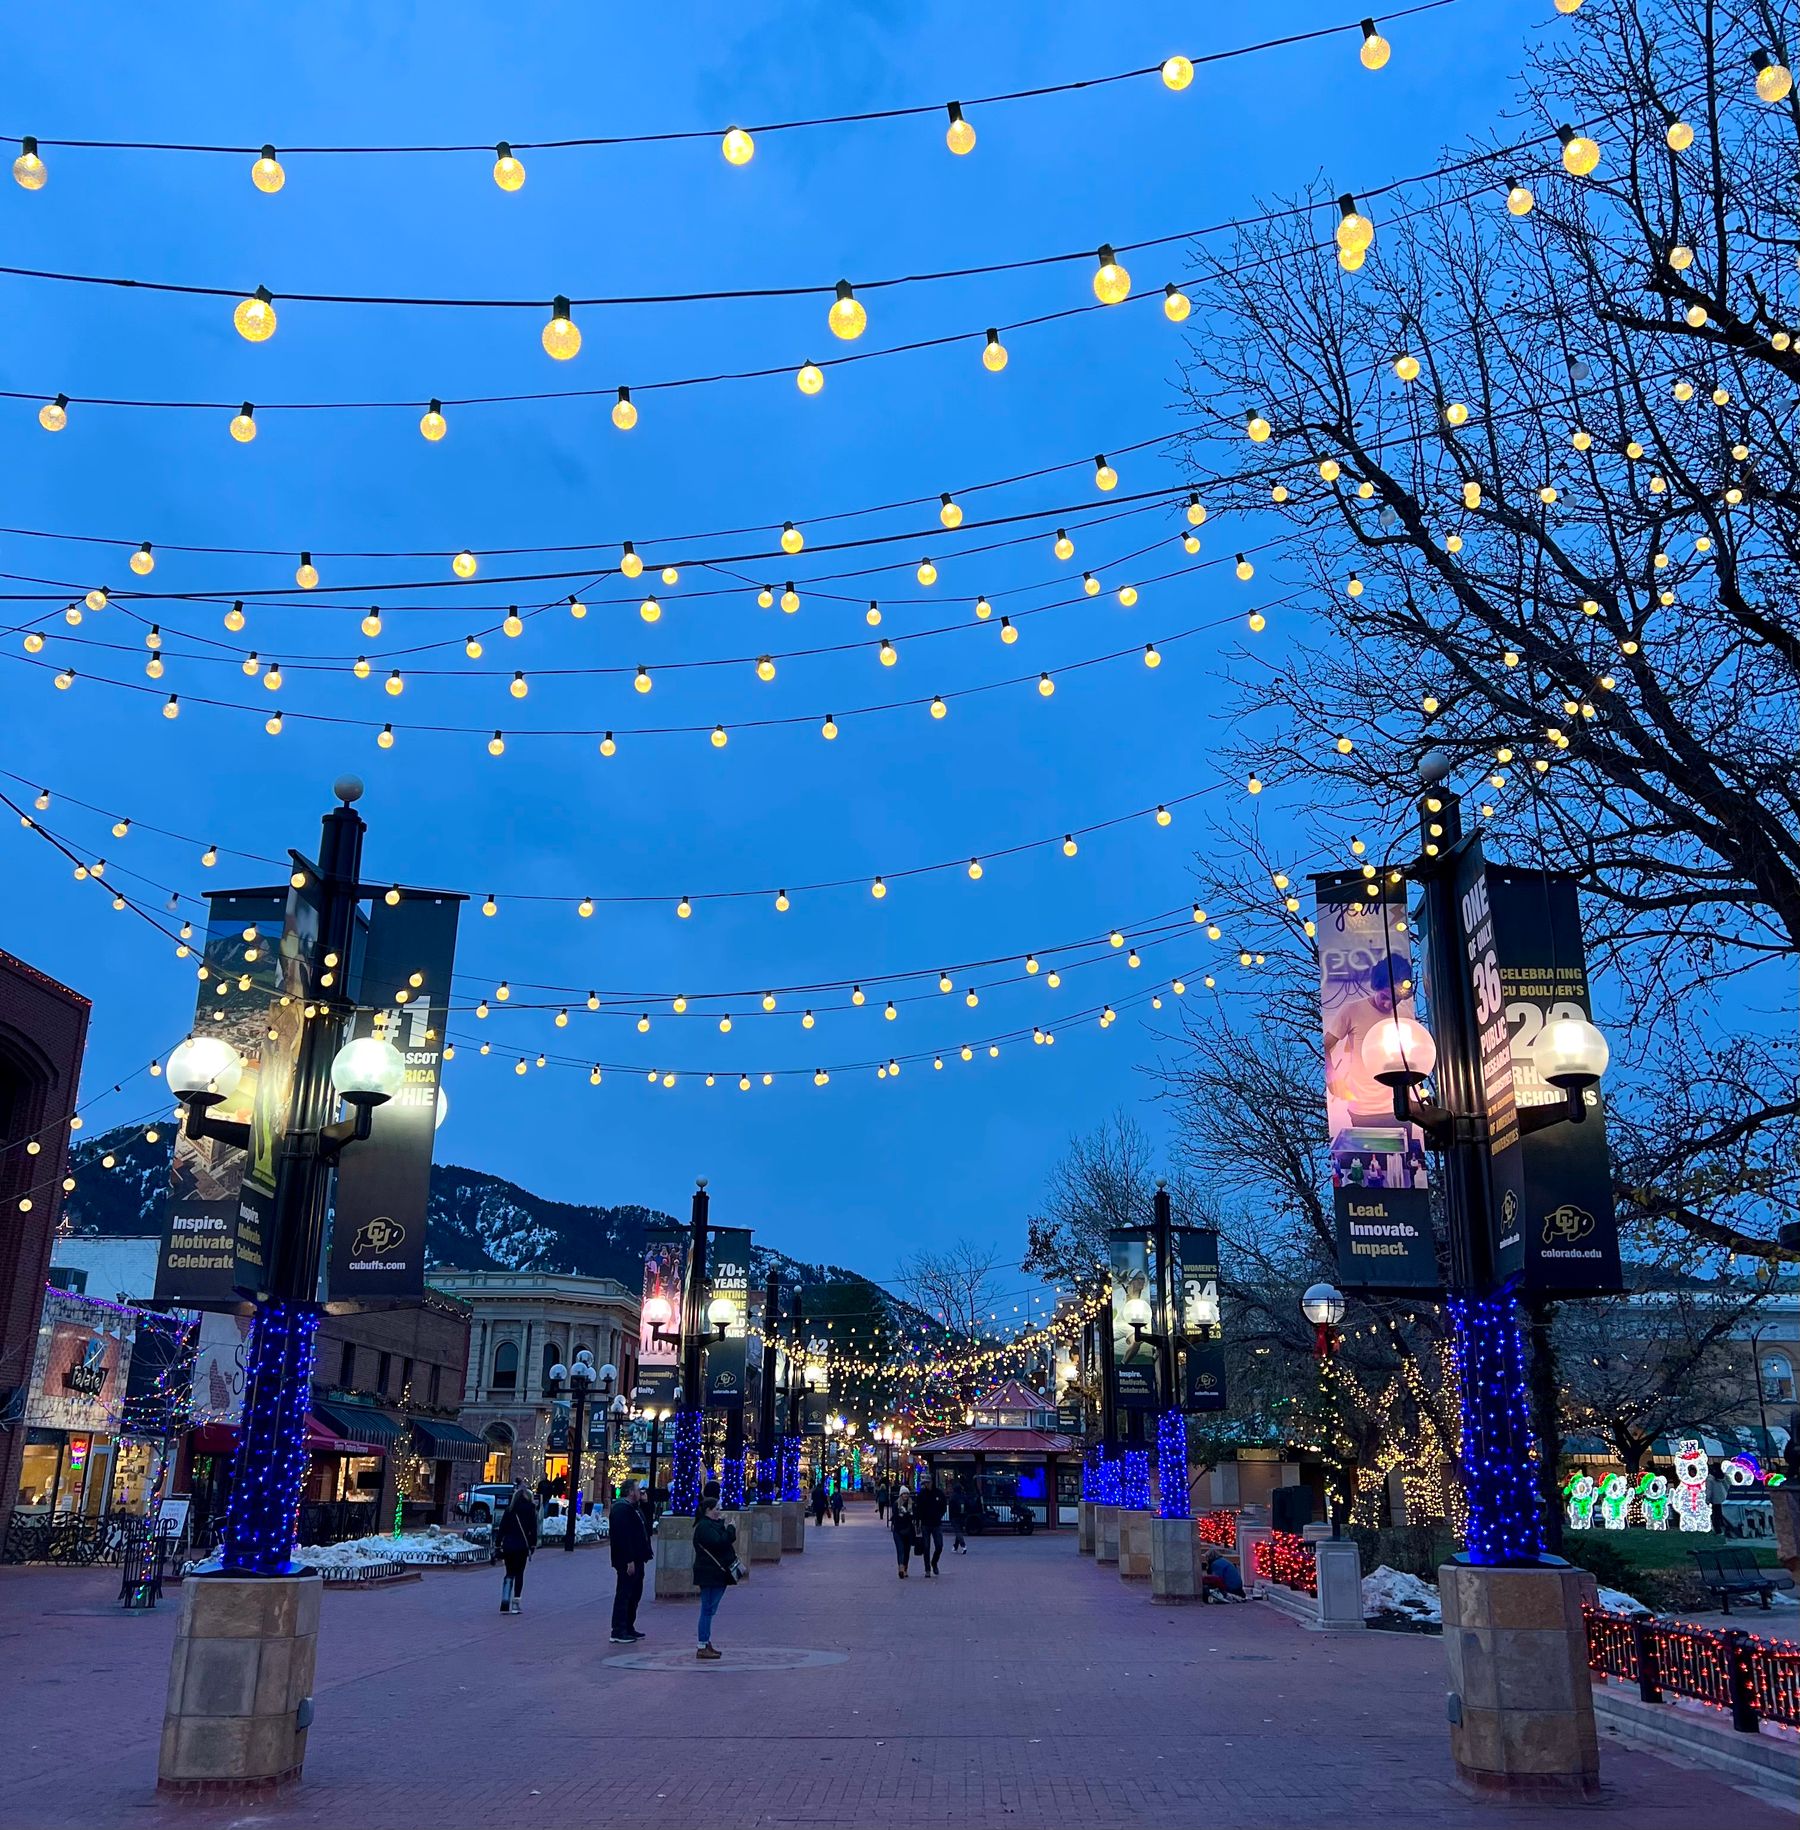 The streets of Downtown Boulder decorated with holiday lights